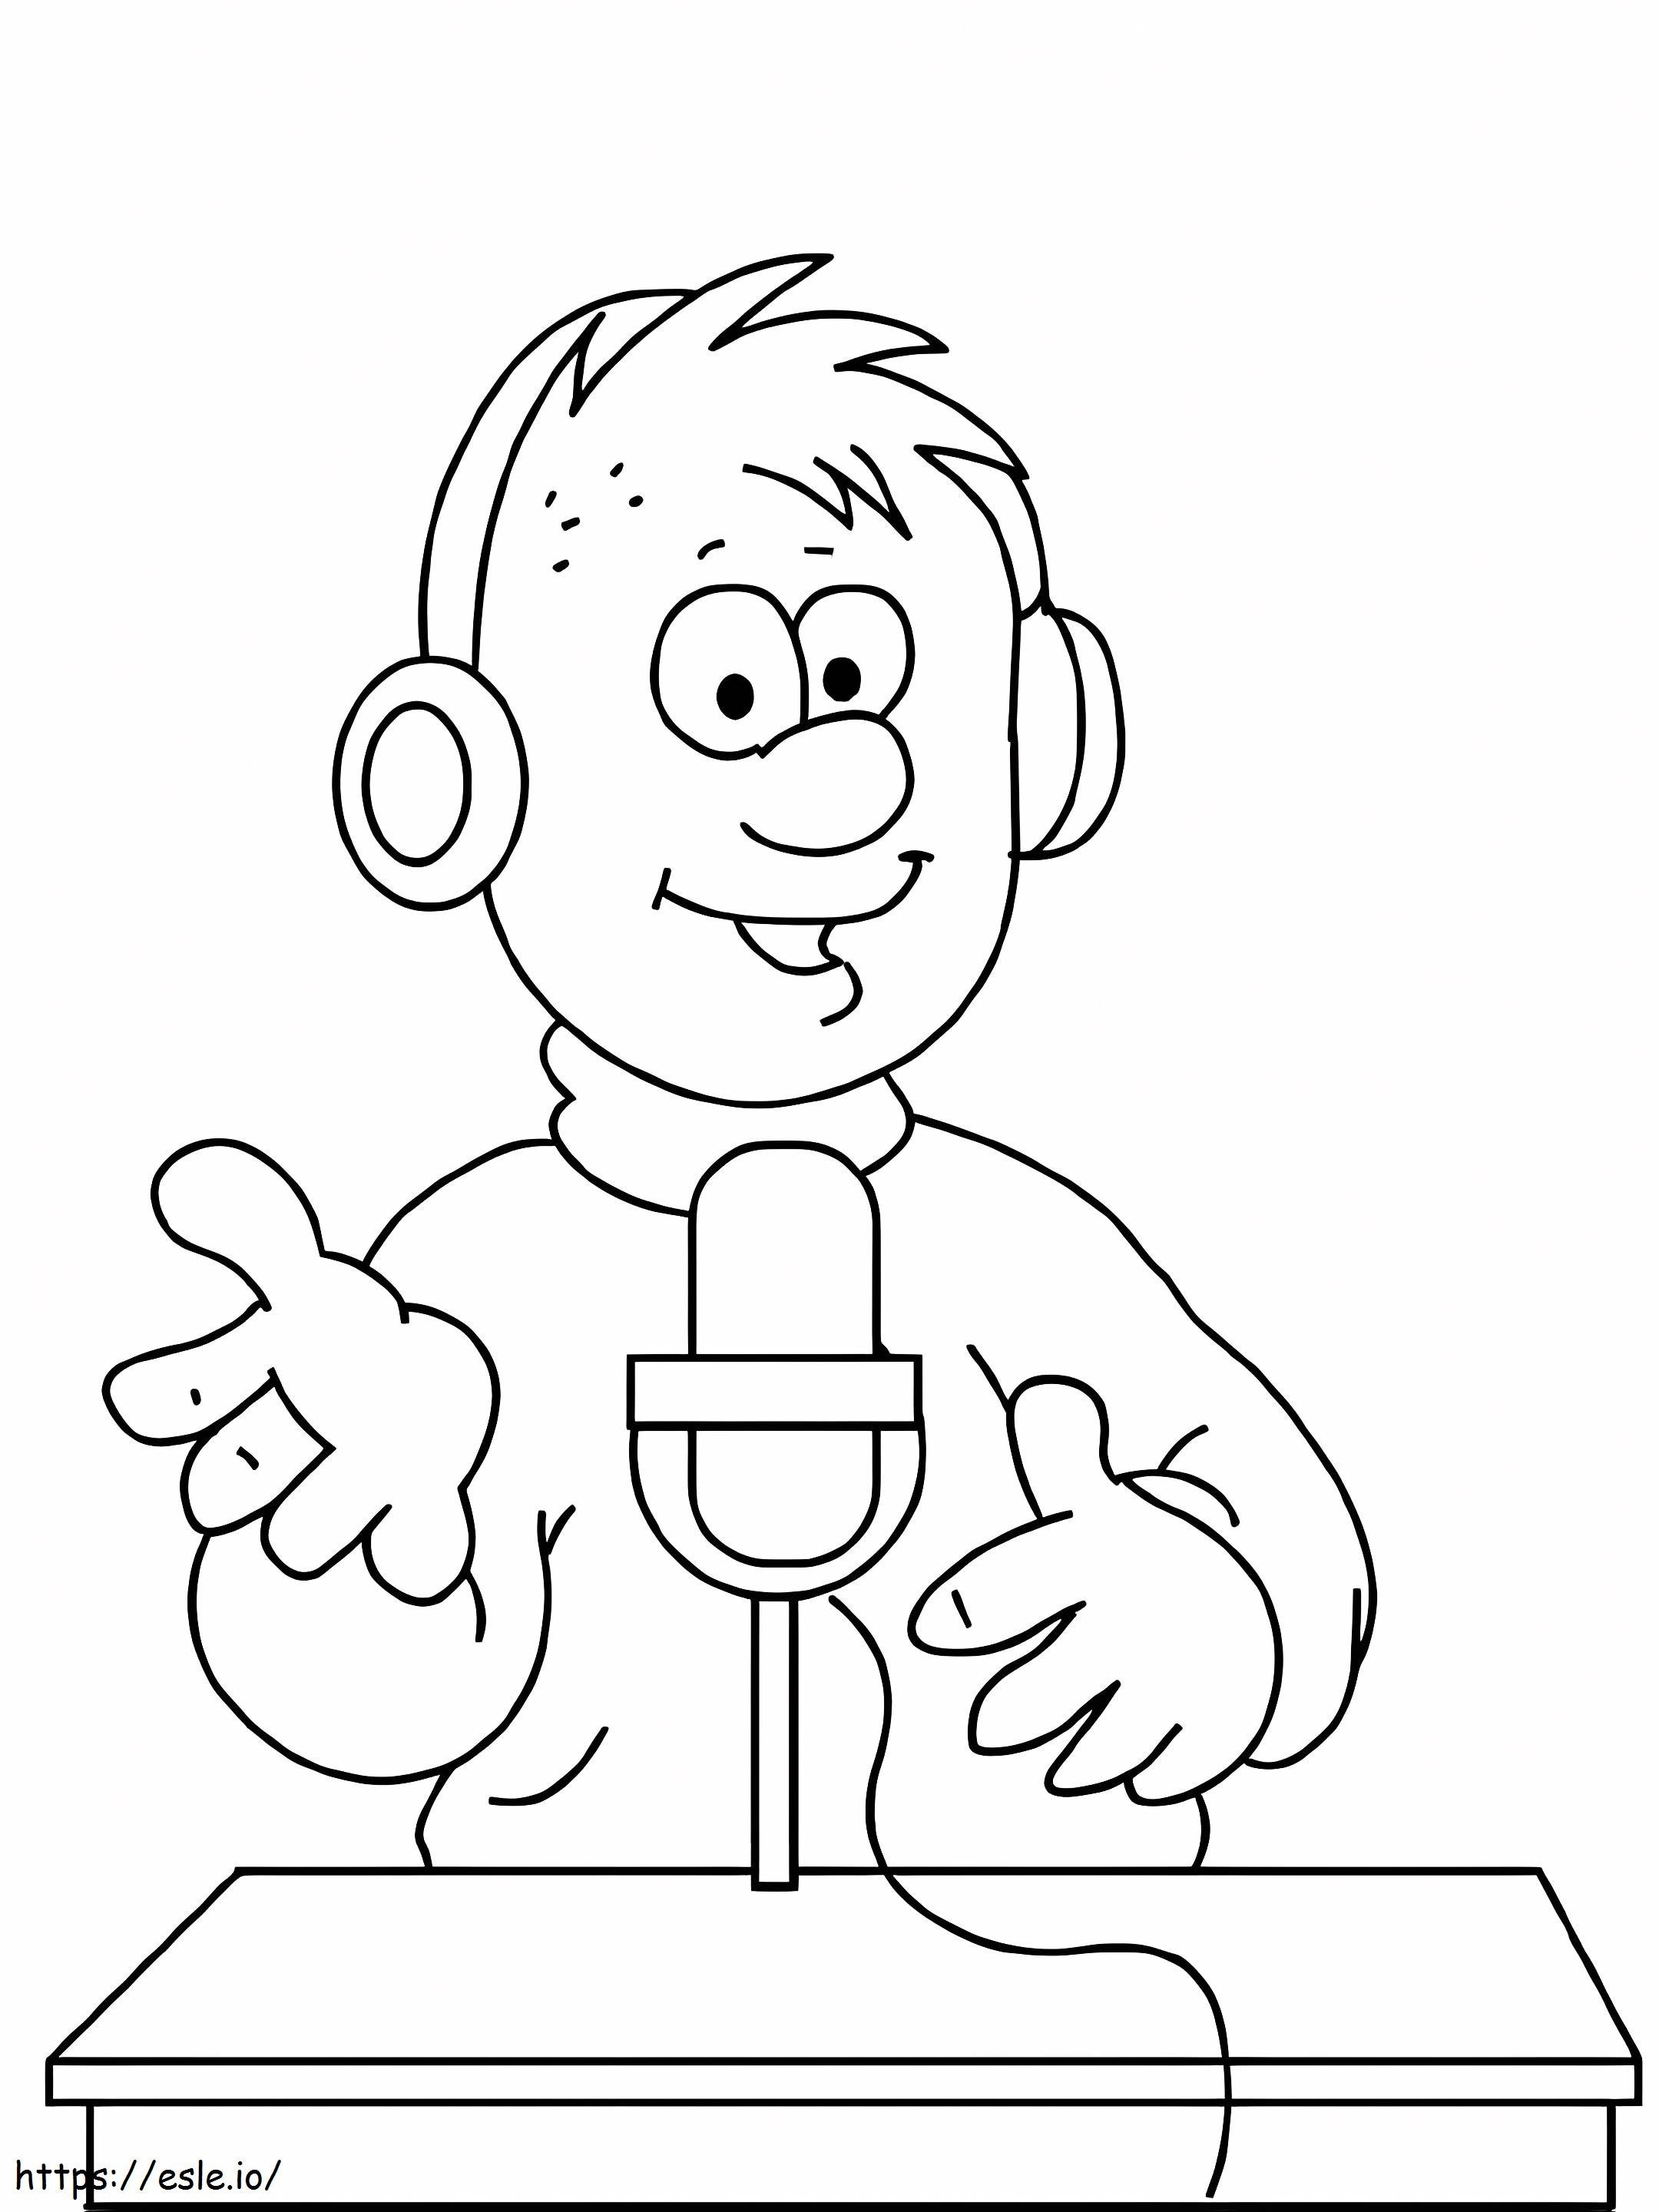 Radio Announcer coloring page